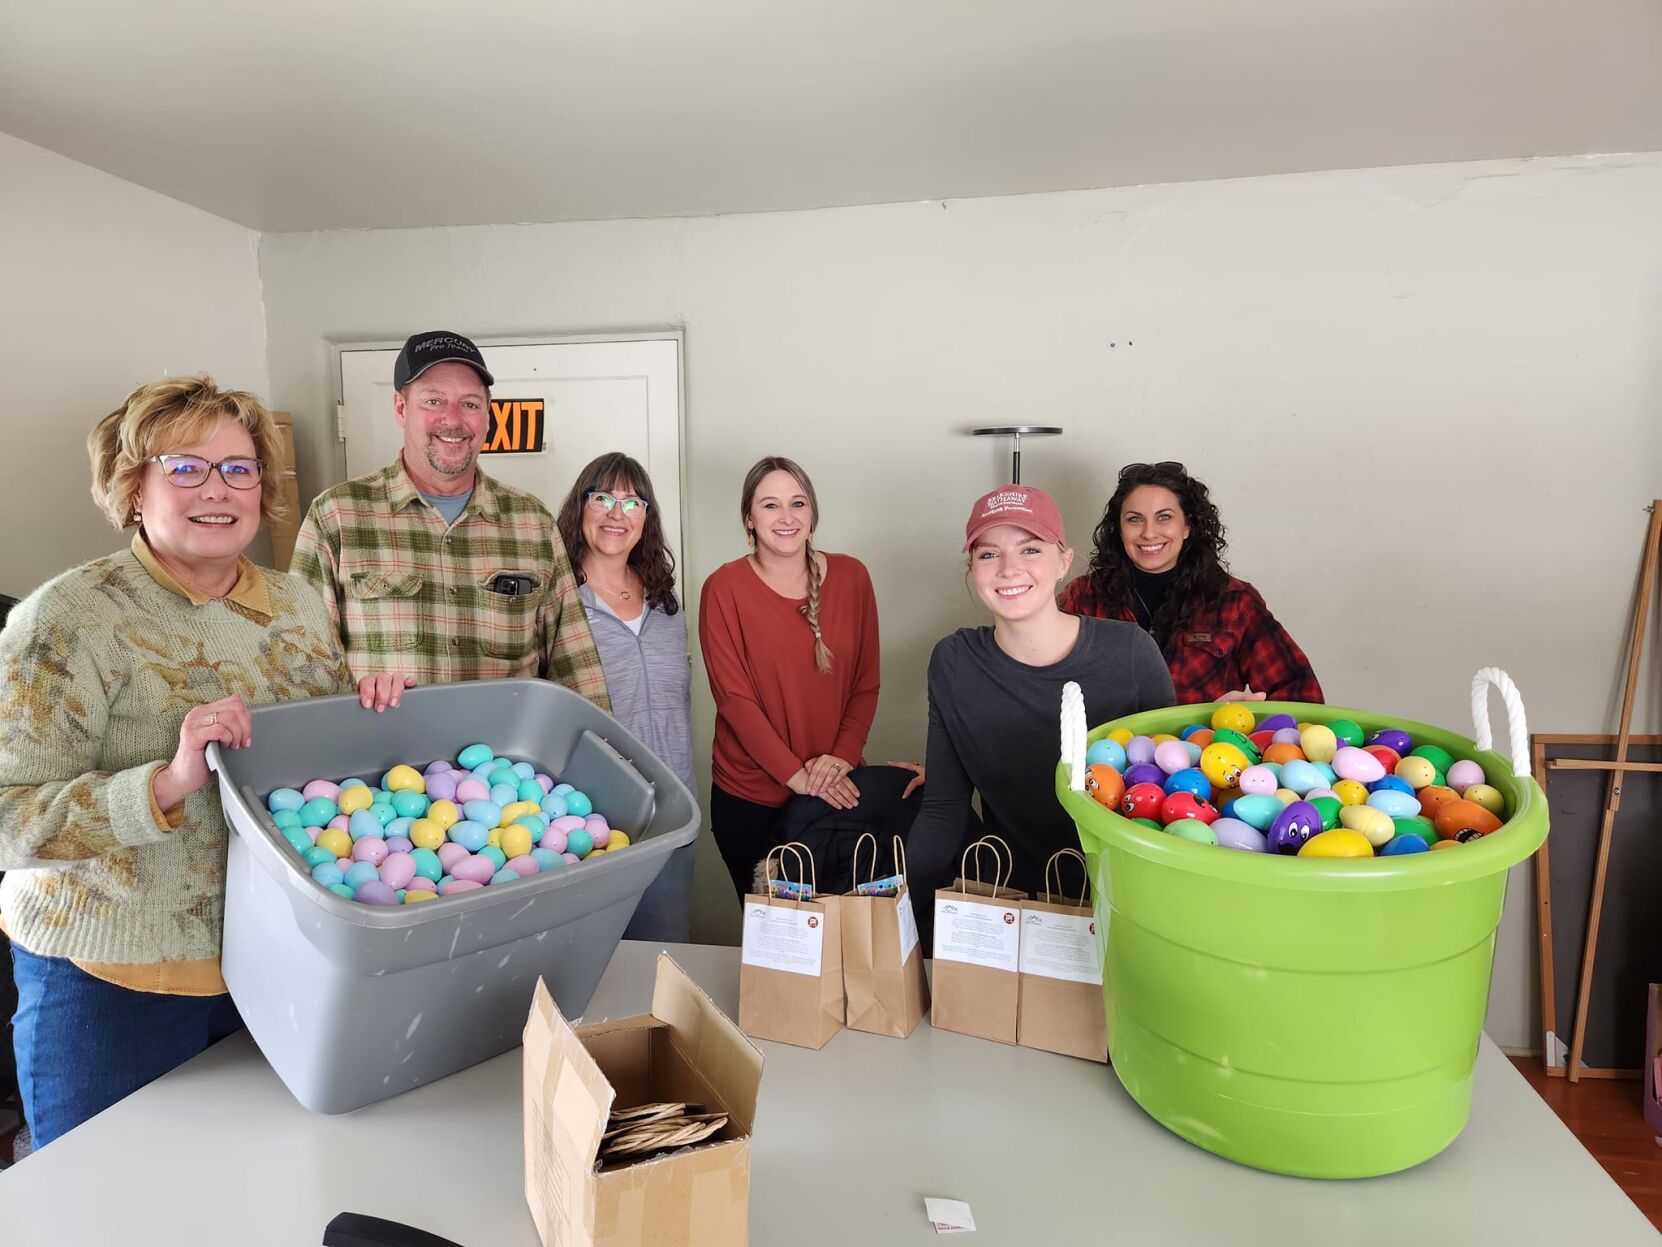 More than 5,000 eggs to be hidden at Easter egg hunt